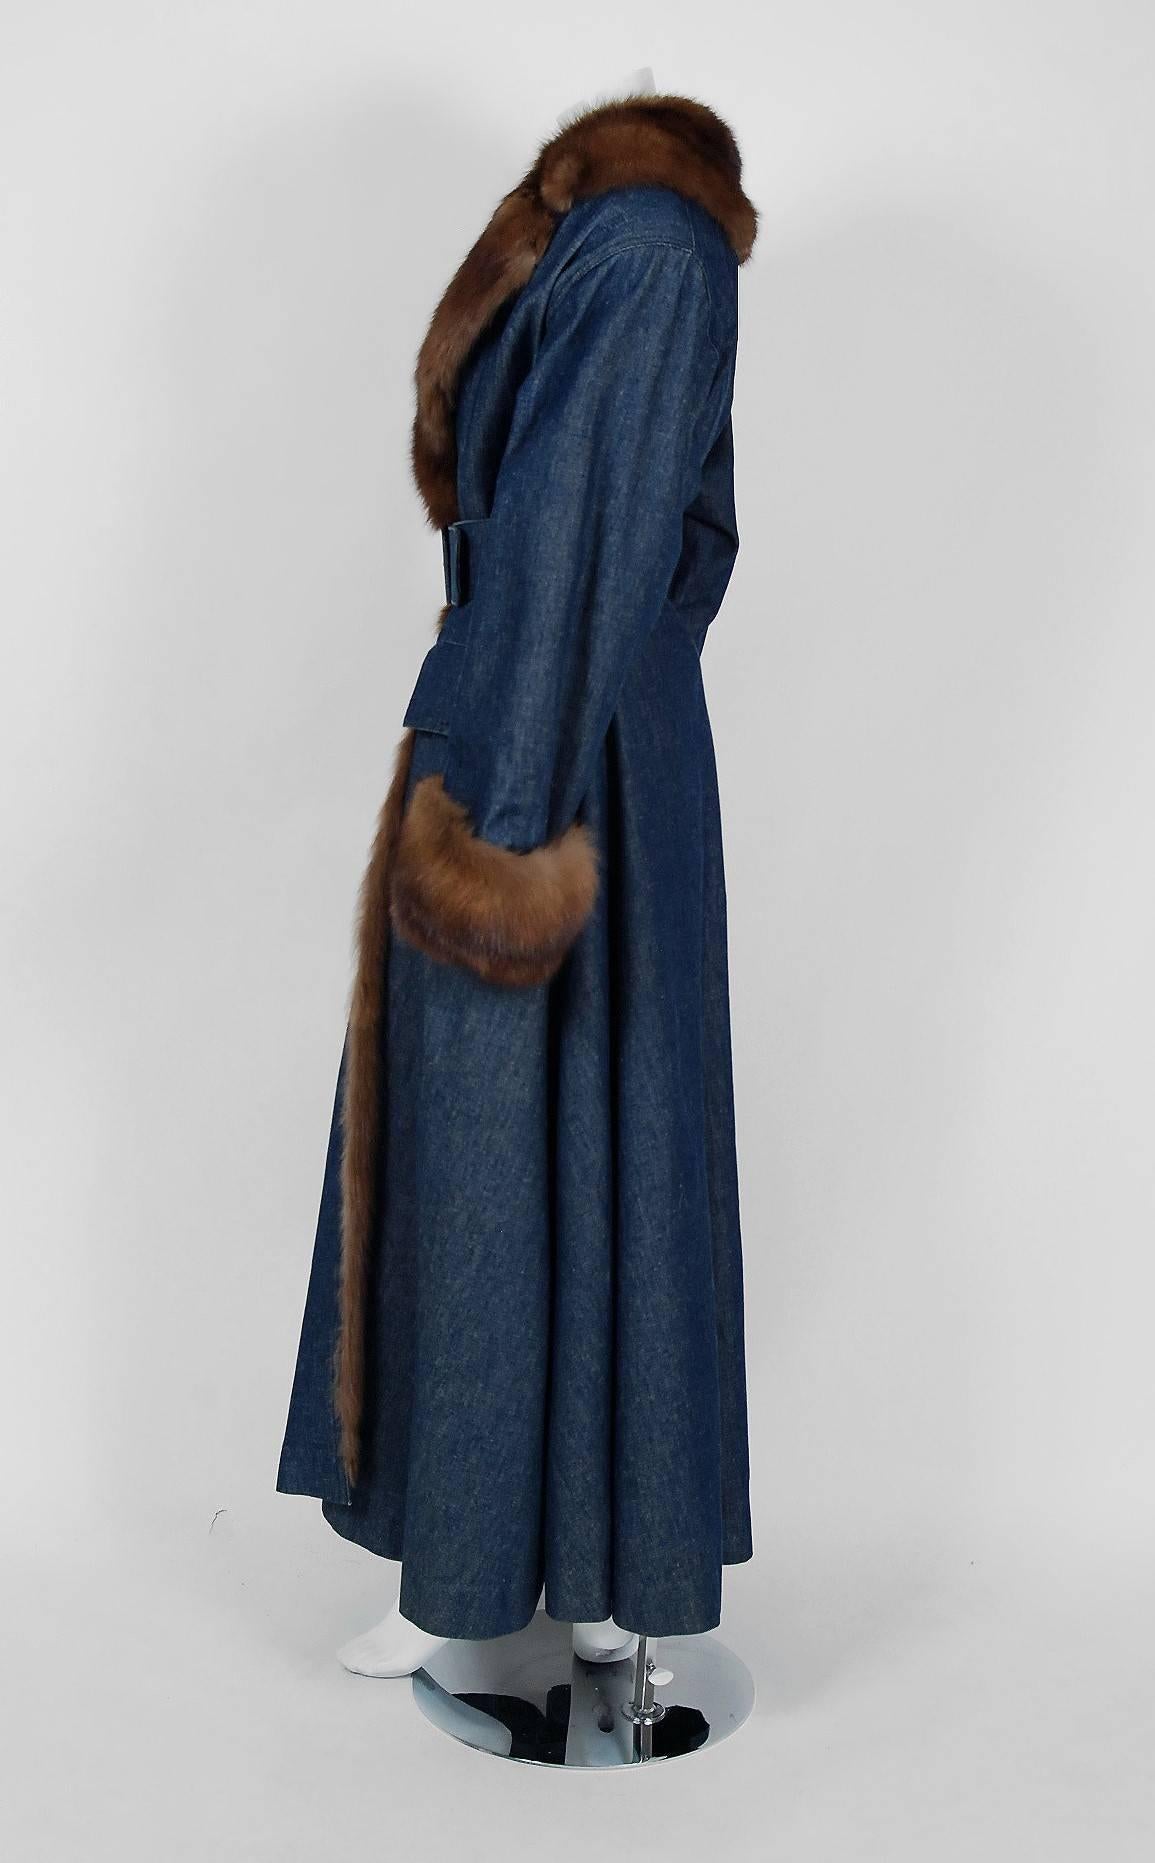 Breathtaking Galanos Couture genuine Russian Sable fur and blue denim princess coat which originally retailed for over $20,000. Dedication to excellence in craftsmanship and design was the foundation of James Galanos' career. The quality of